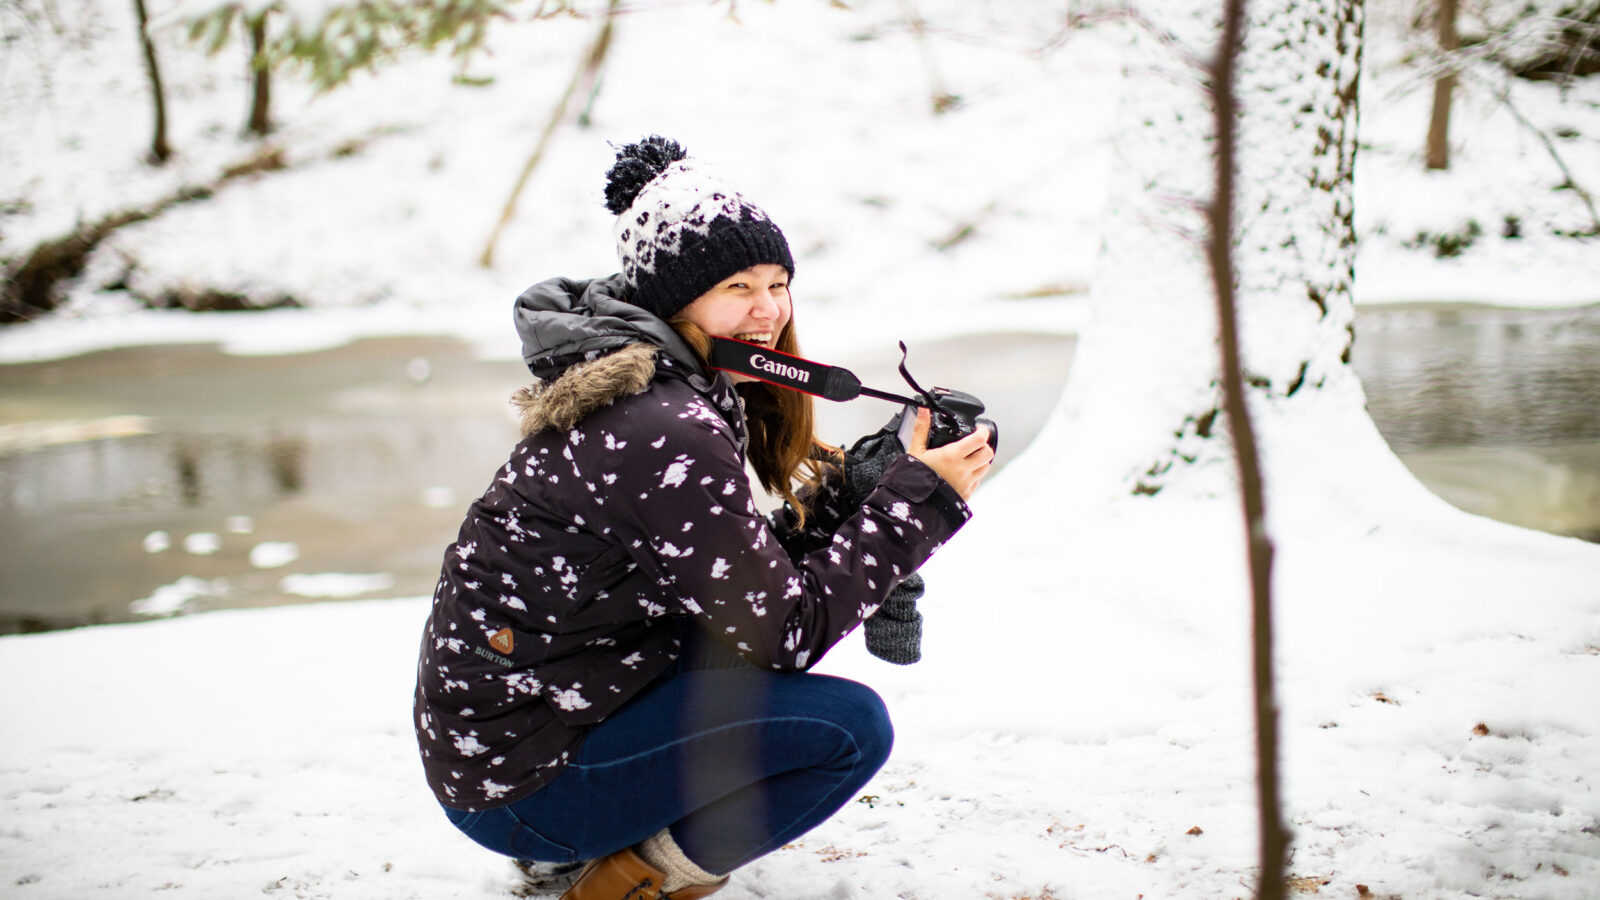 A student crouches in the snow to get a wintery photo in the woods.